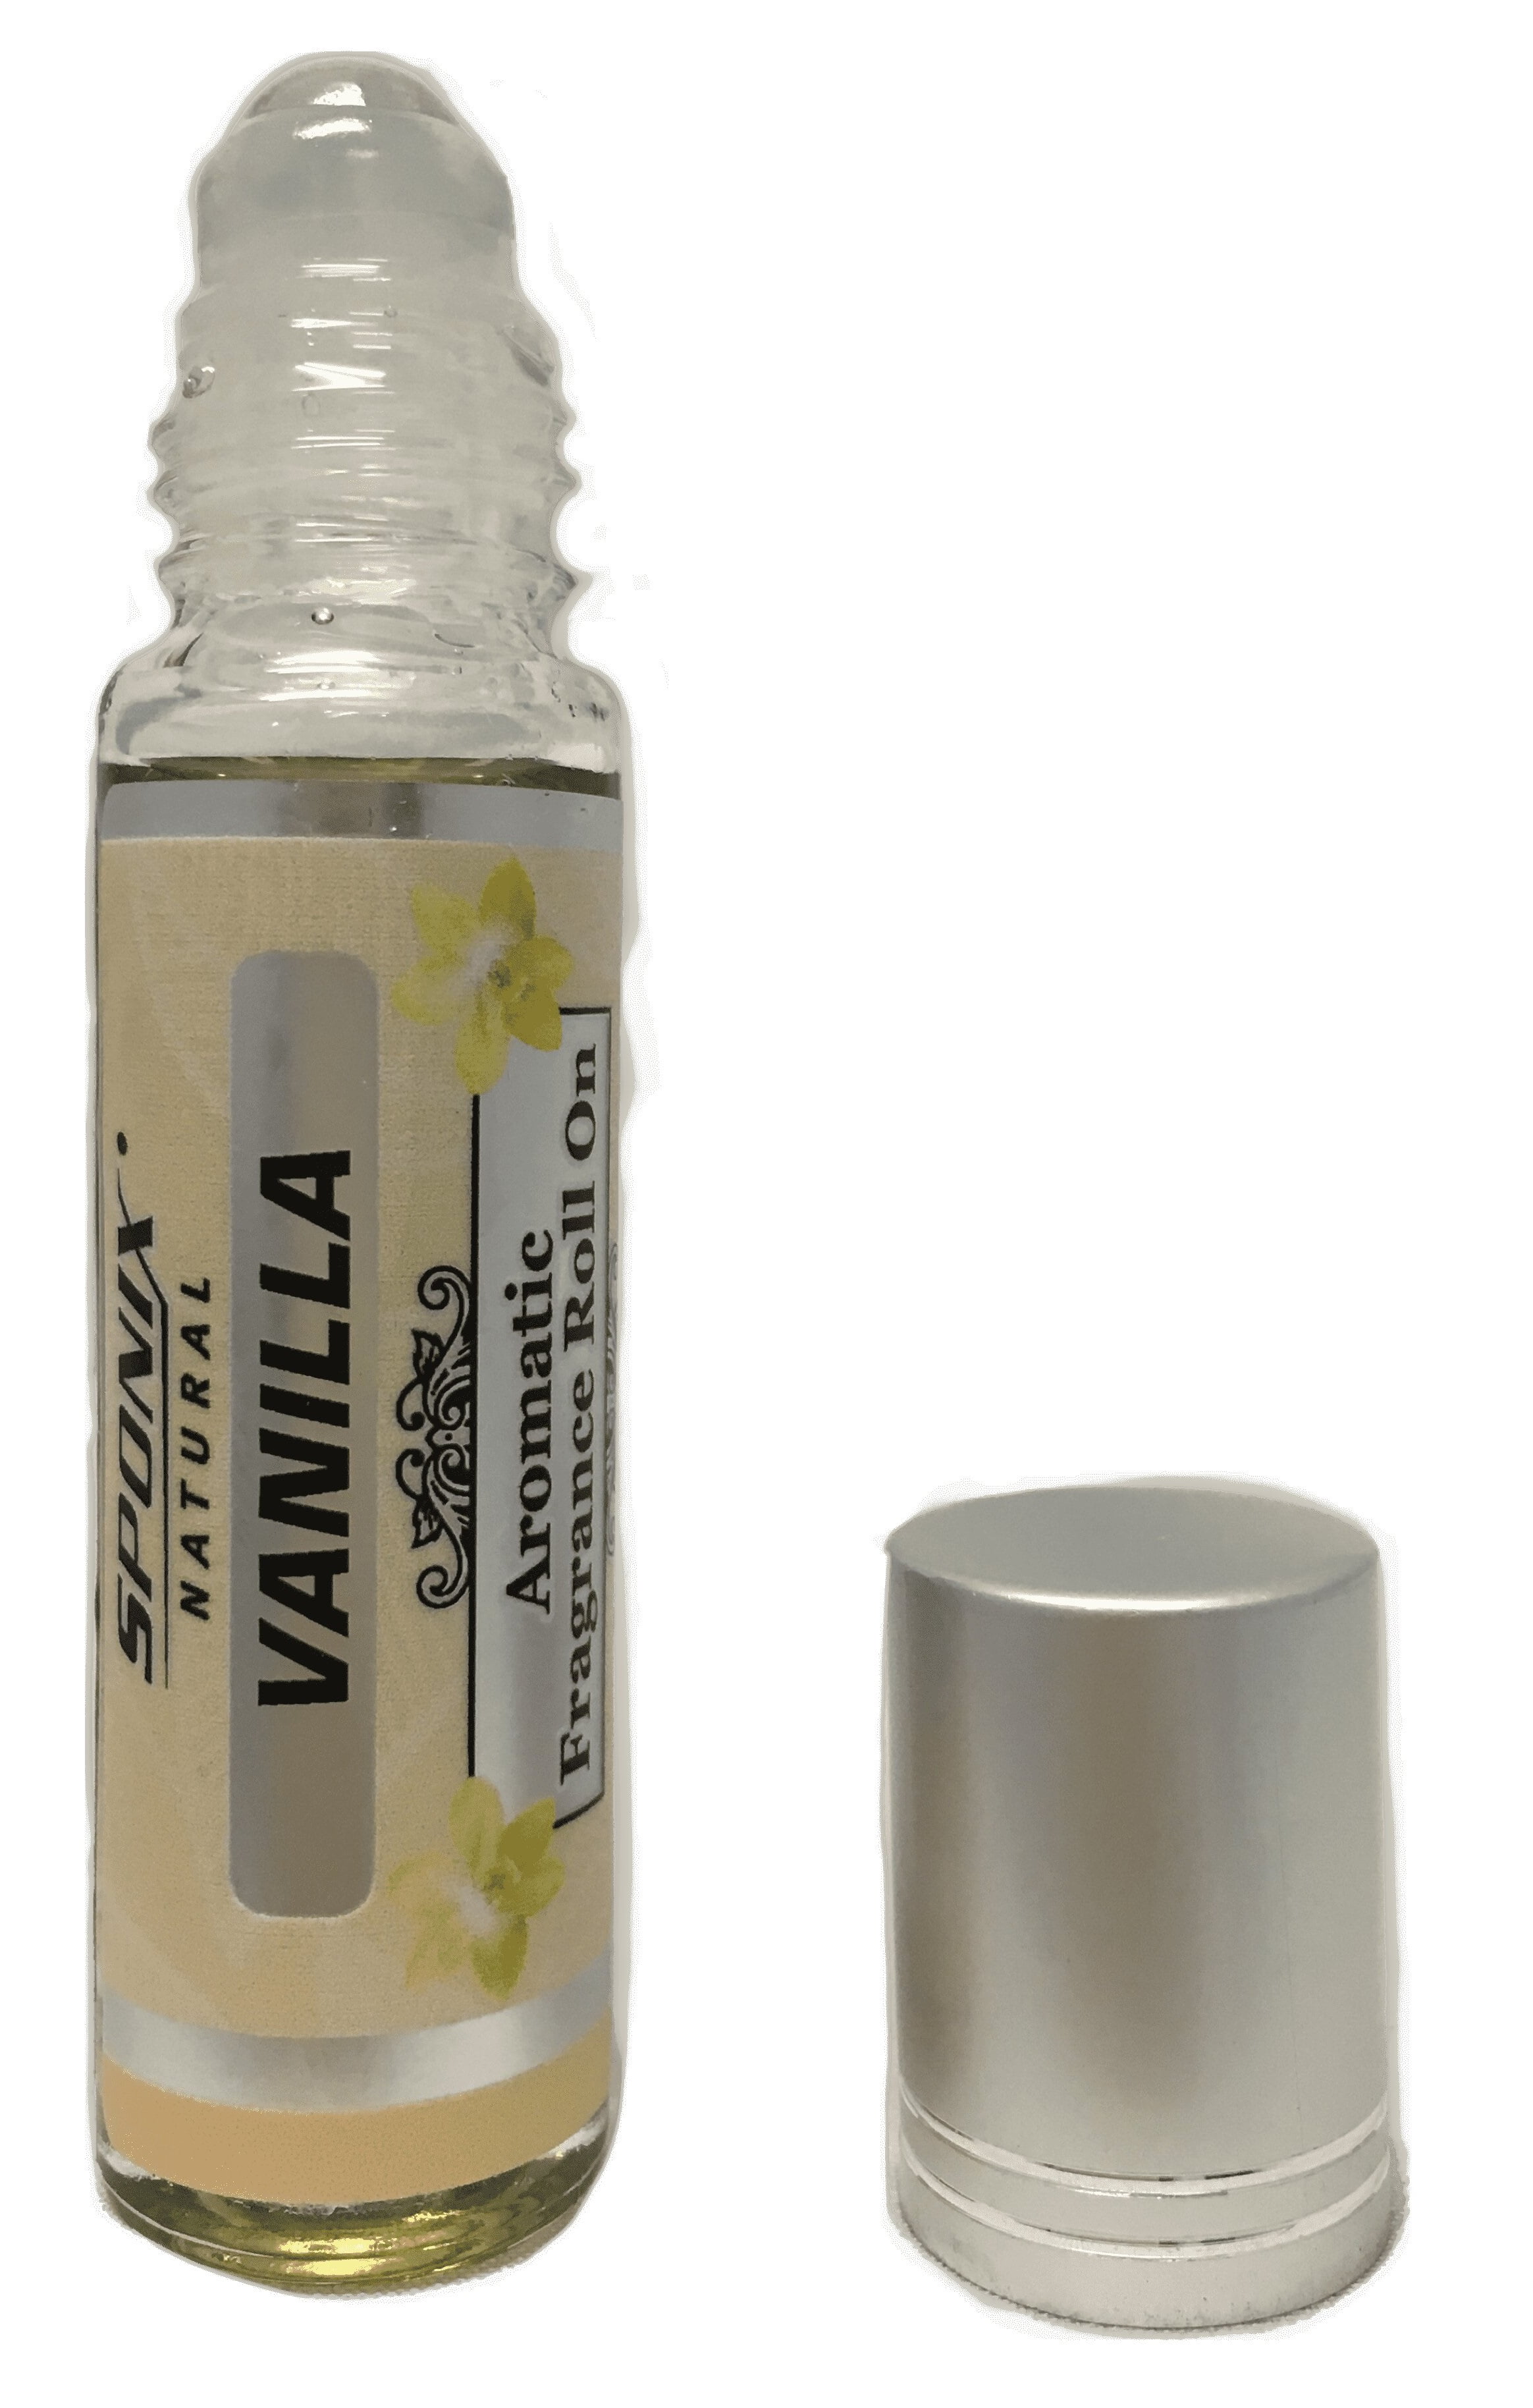 Avany 100% Pure Uncut Alcohol Free Roll on Body Oil Perfume and Cologne  (White Musk, Unisex)